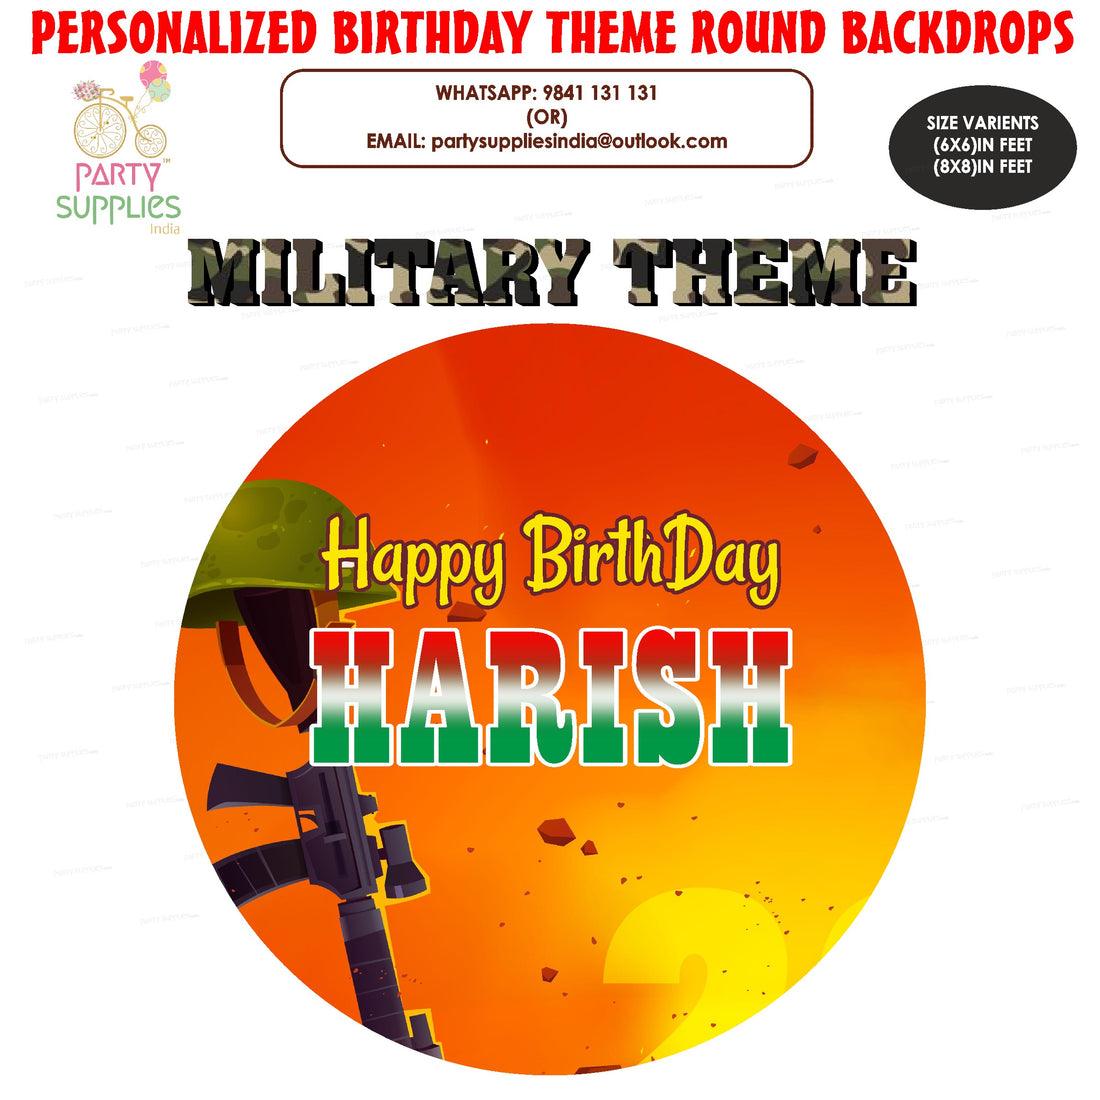 PSI Military Theme Personalized Roound Backdrop